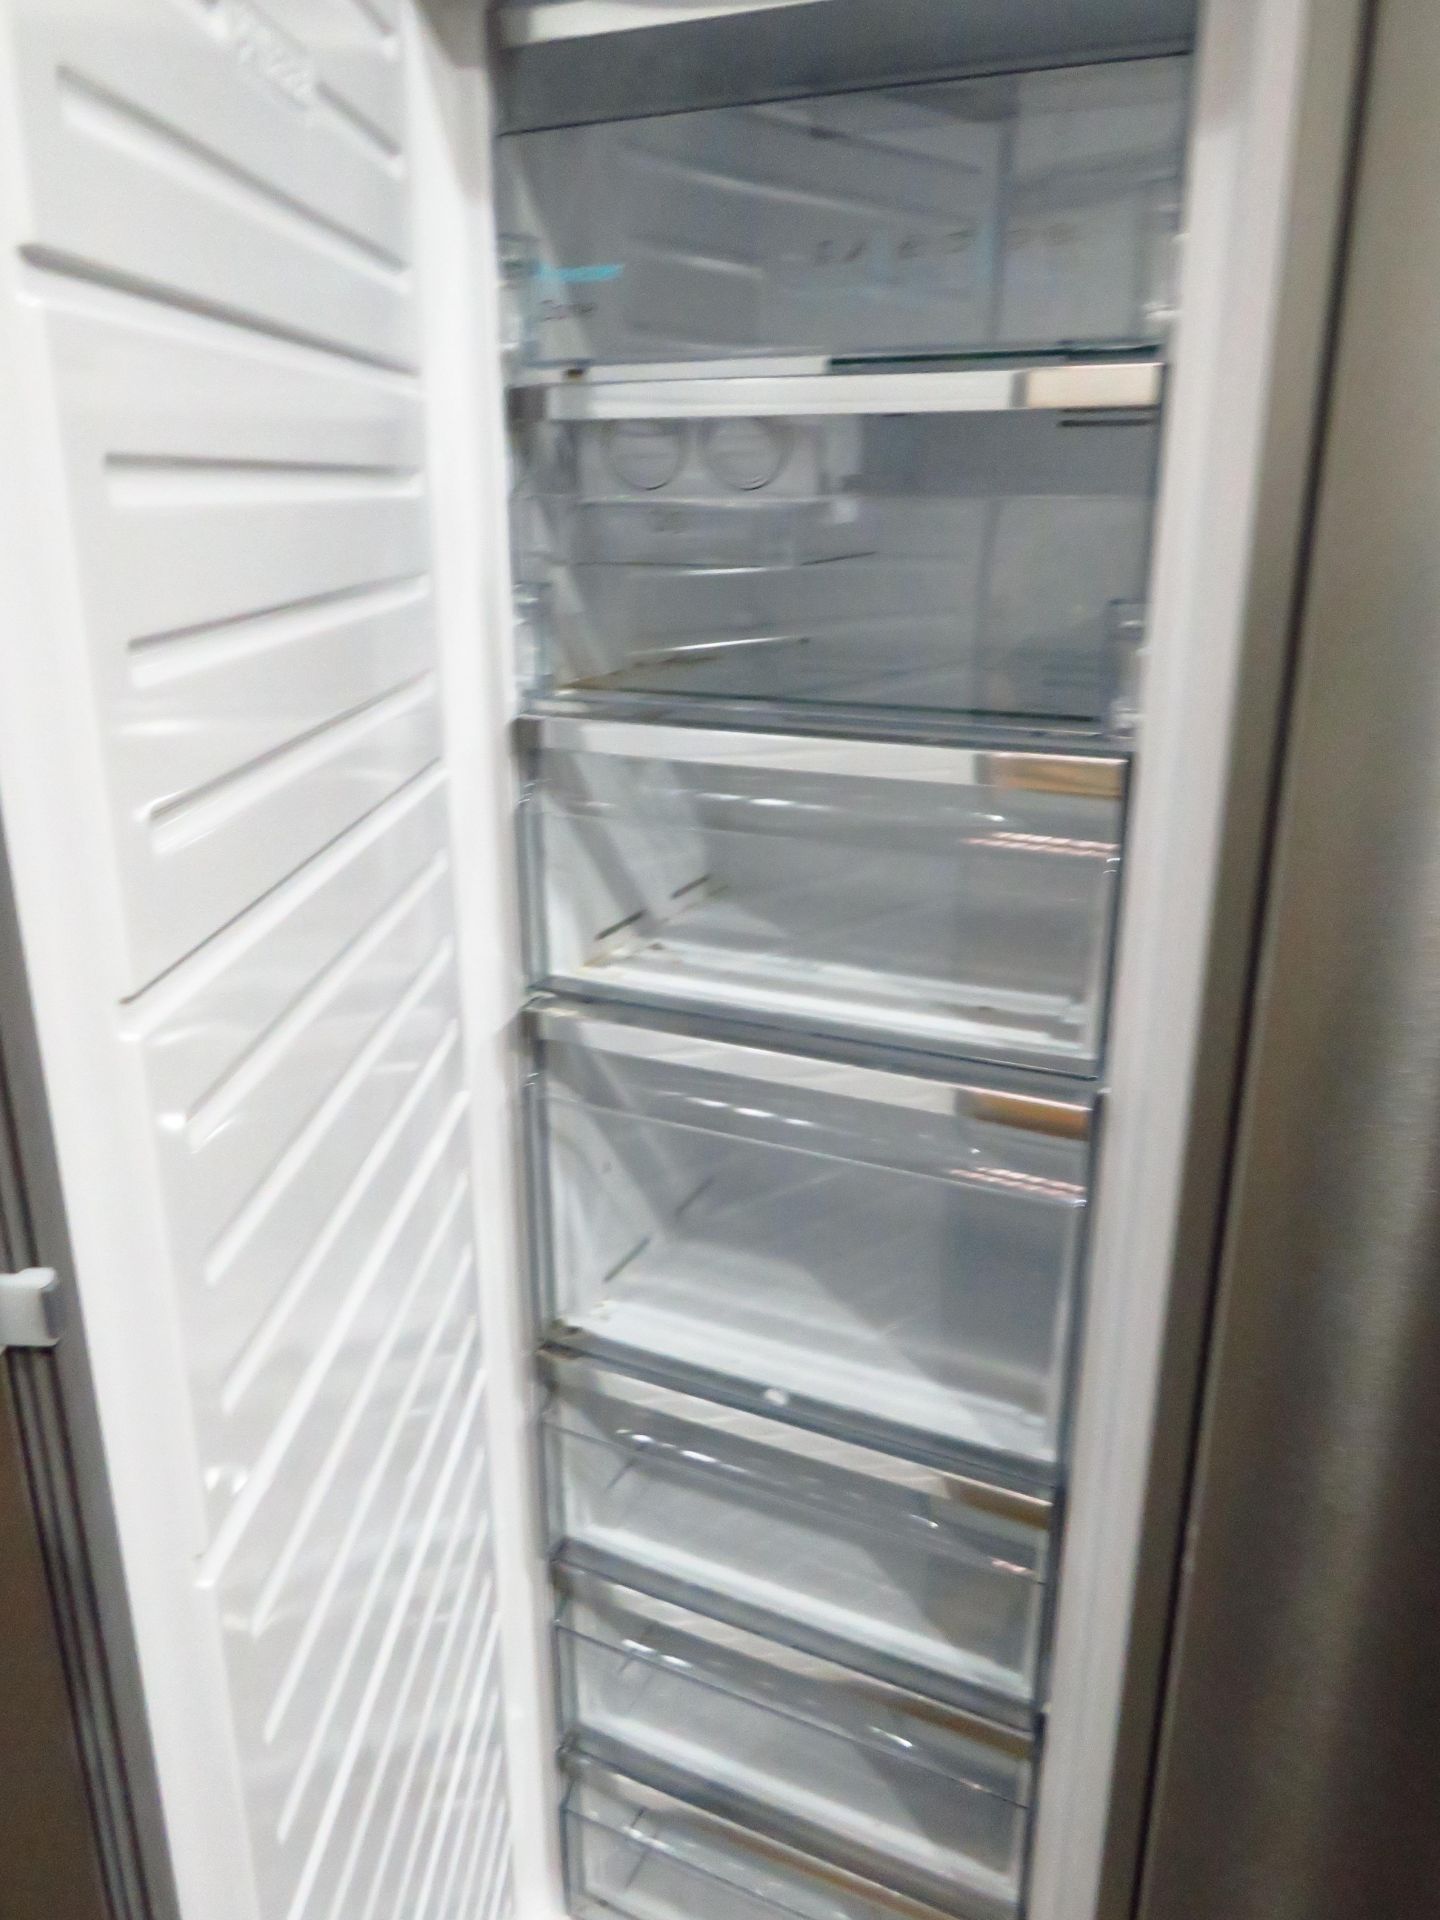 Sharp tall freestanding freezers, tested and working for coldness - Image 2 of 2